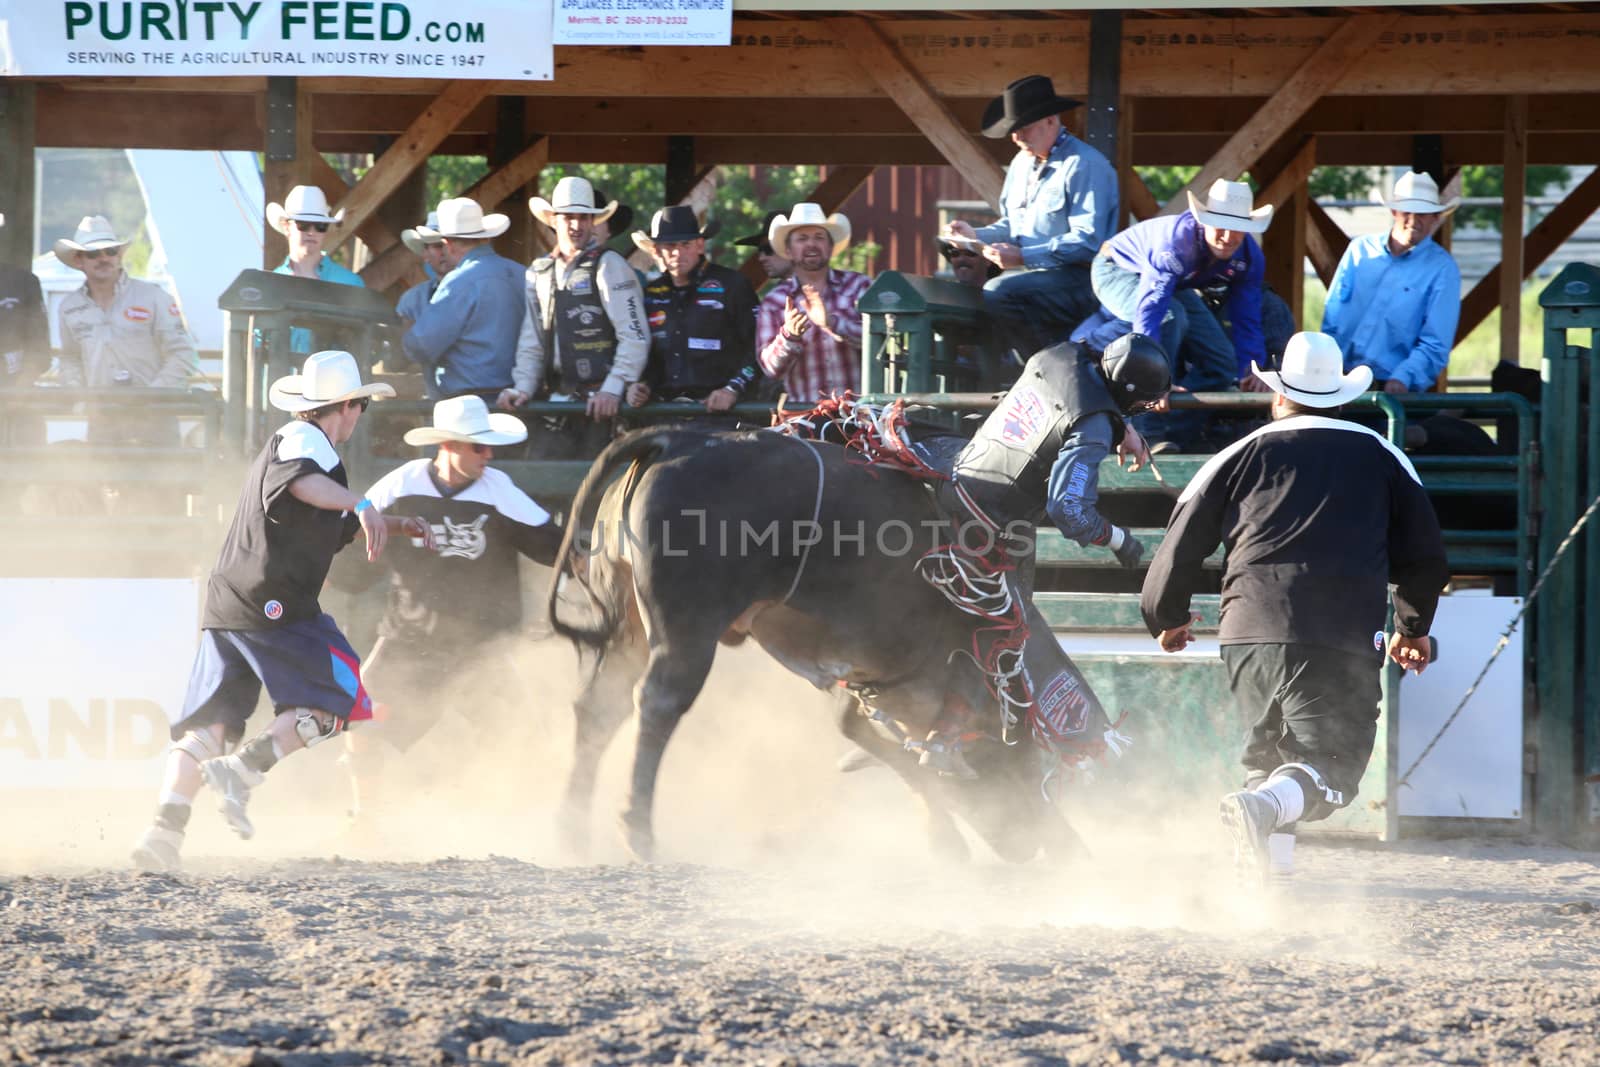 MERRITT, B.C. CANADA - May 30, 2015: Bull rider riding in the final round of The 3rd Annual Ty Pozzobon Invitational PBR Event.